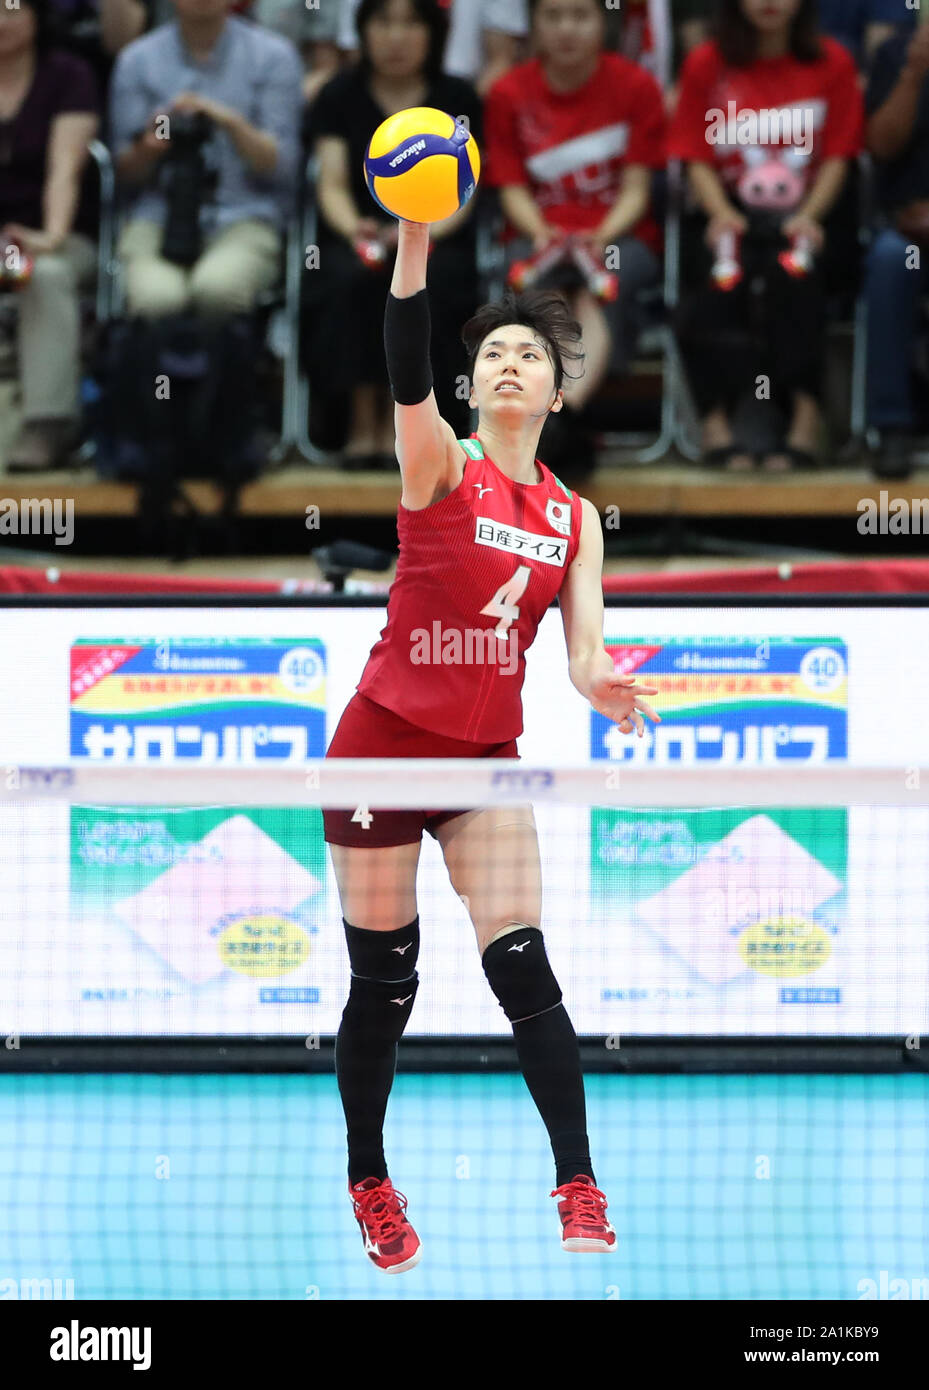 (190927) -- OSAKA, Sept. 27, 2019 (Xinhua) -- Risa Shinnabe of Japan serves during a round robin match against Serbia at the 2019 FIVB Volleyball Women's World Cup in Osaka, Japan, Sept. 27, 2019. (Xinhua/Du Xiaoyi) Stock Photo